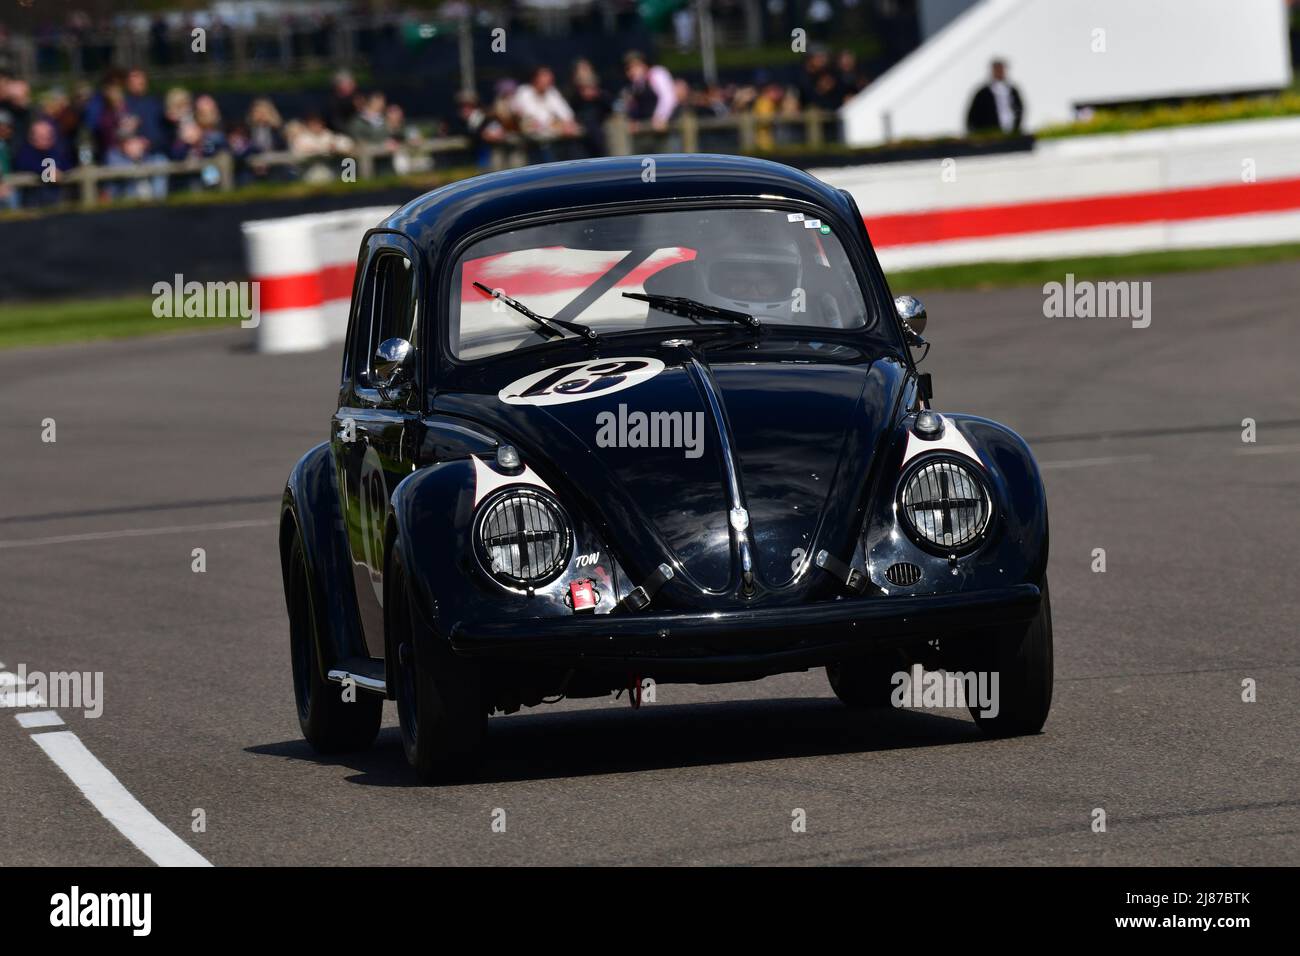 Drew Pritchard, Volkswagen Beetle, Sopwith Cup, This was a twenty minute race for vehicles of a type that competed up to 1956, it featured a considera Stock Photo